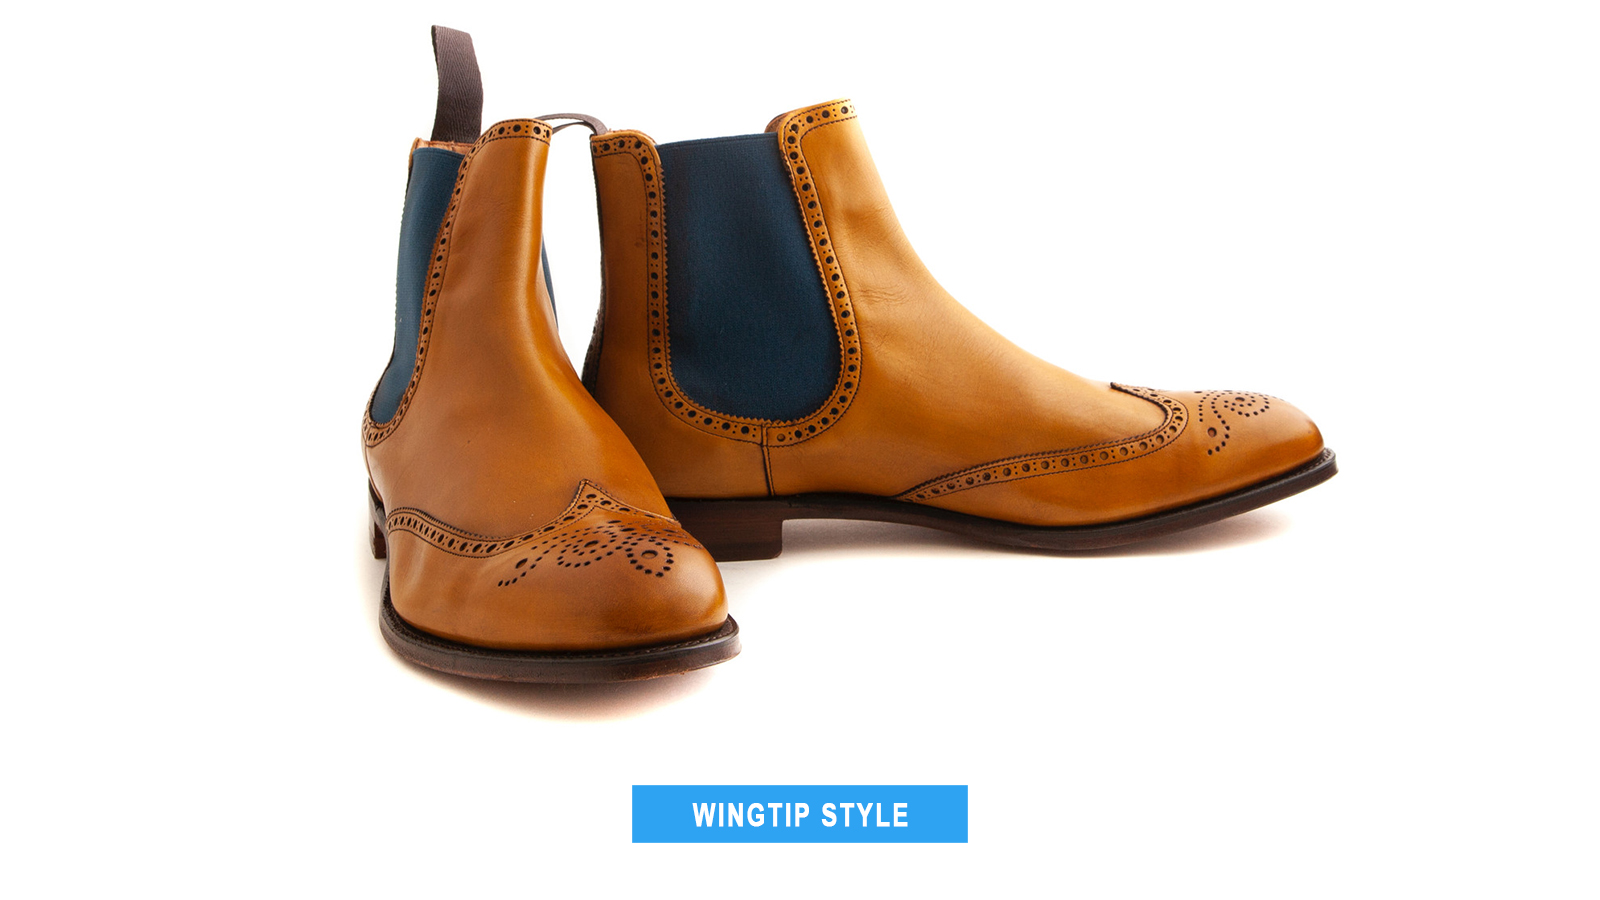 wingtip boots style